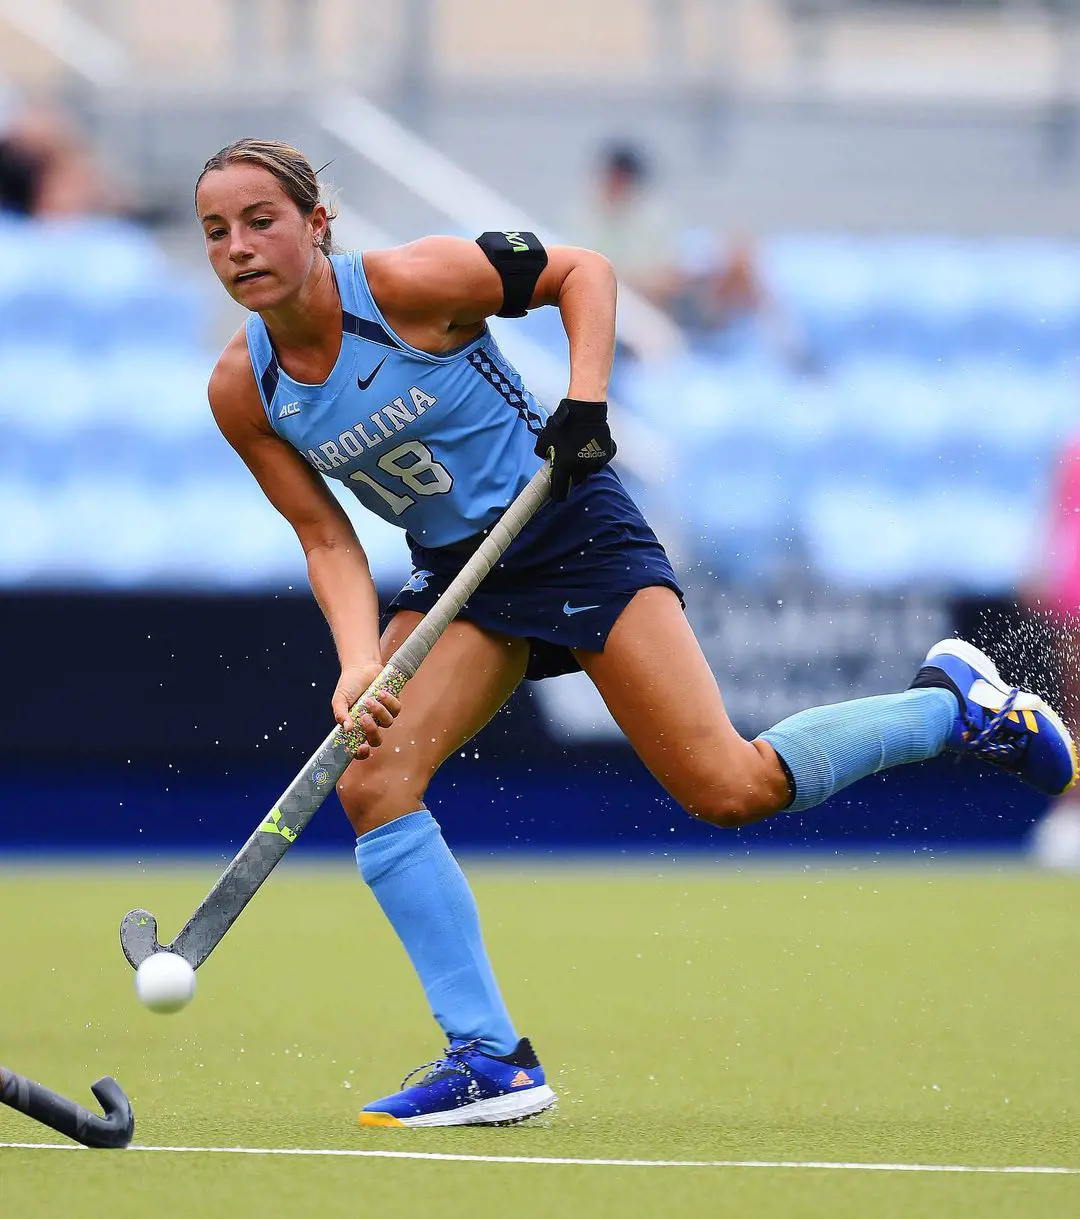 North Carolina Athlete Alli Meehan Holding A Stick On 26 August 2022